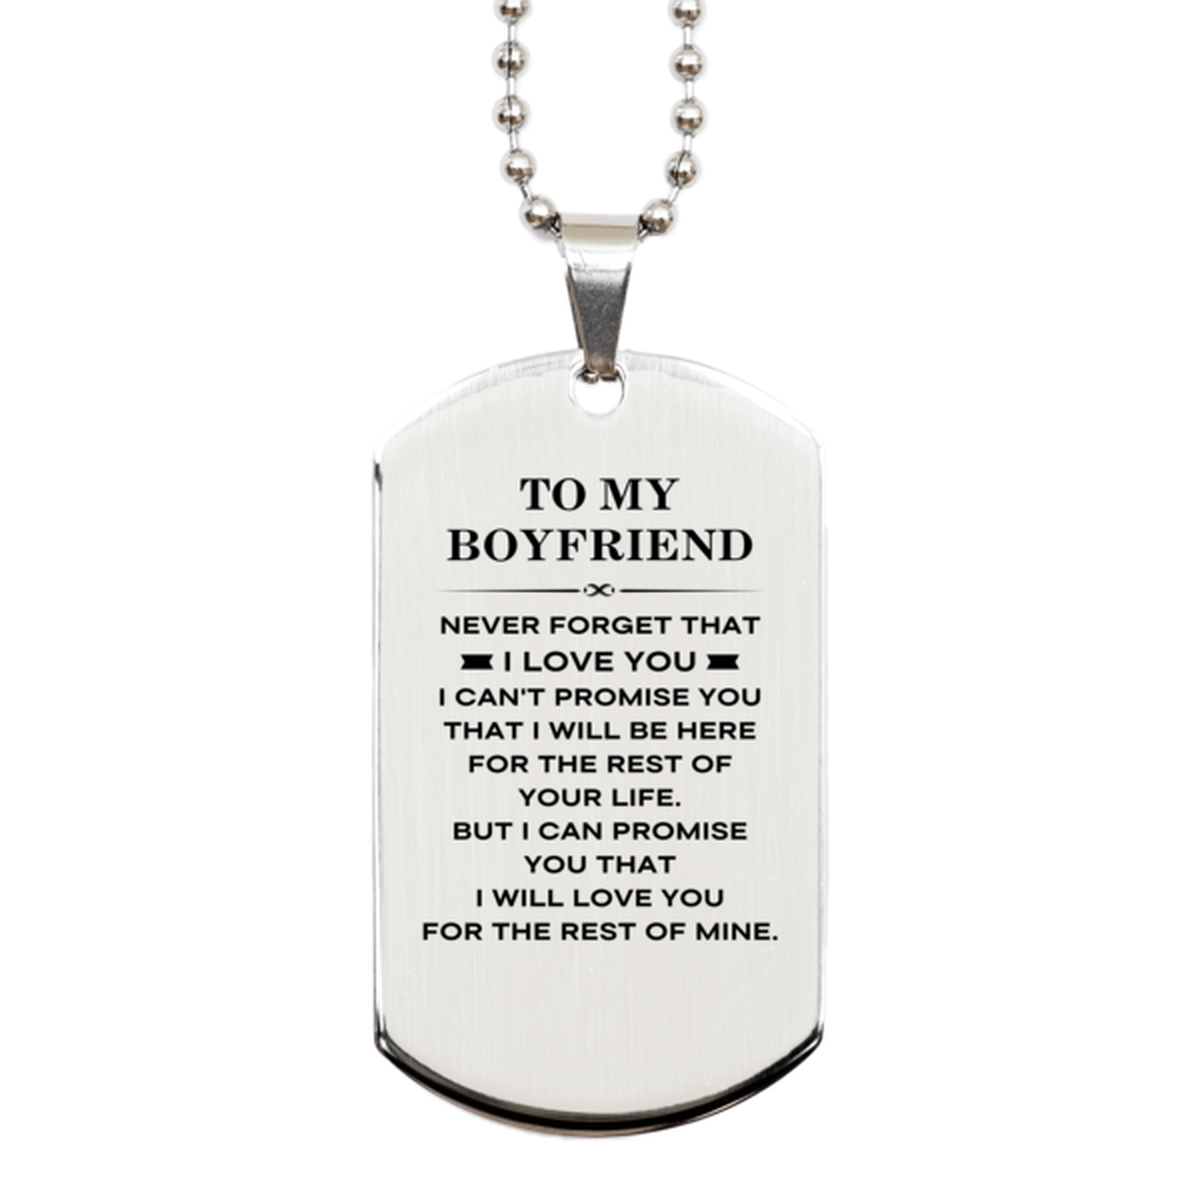 To My Boyfriend Gifts, I will love you for the rest of mine, Love Boyfriend Dog Tag Necklace, Birthday Christmas Unique Silver Dog Tag For Boyfriend